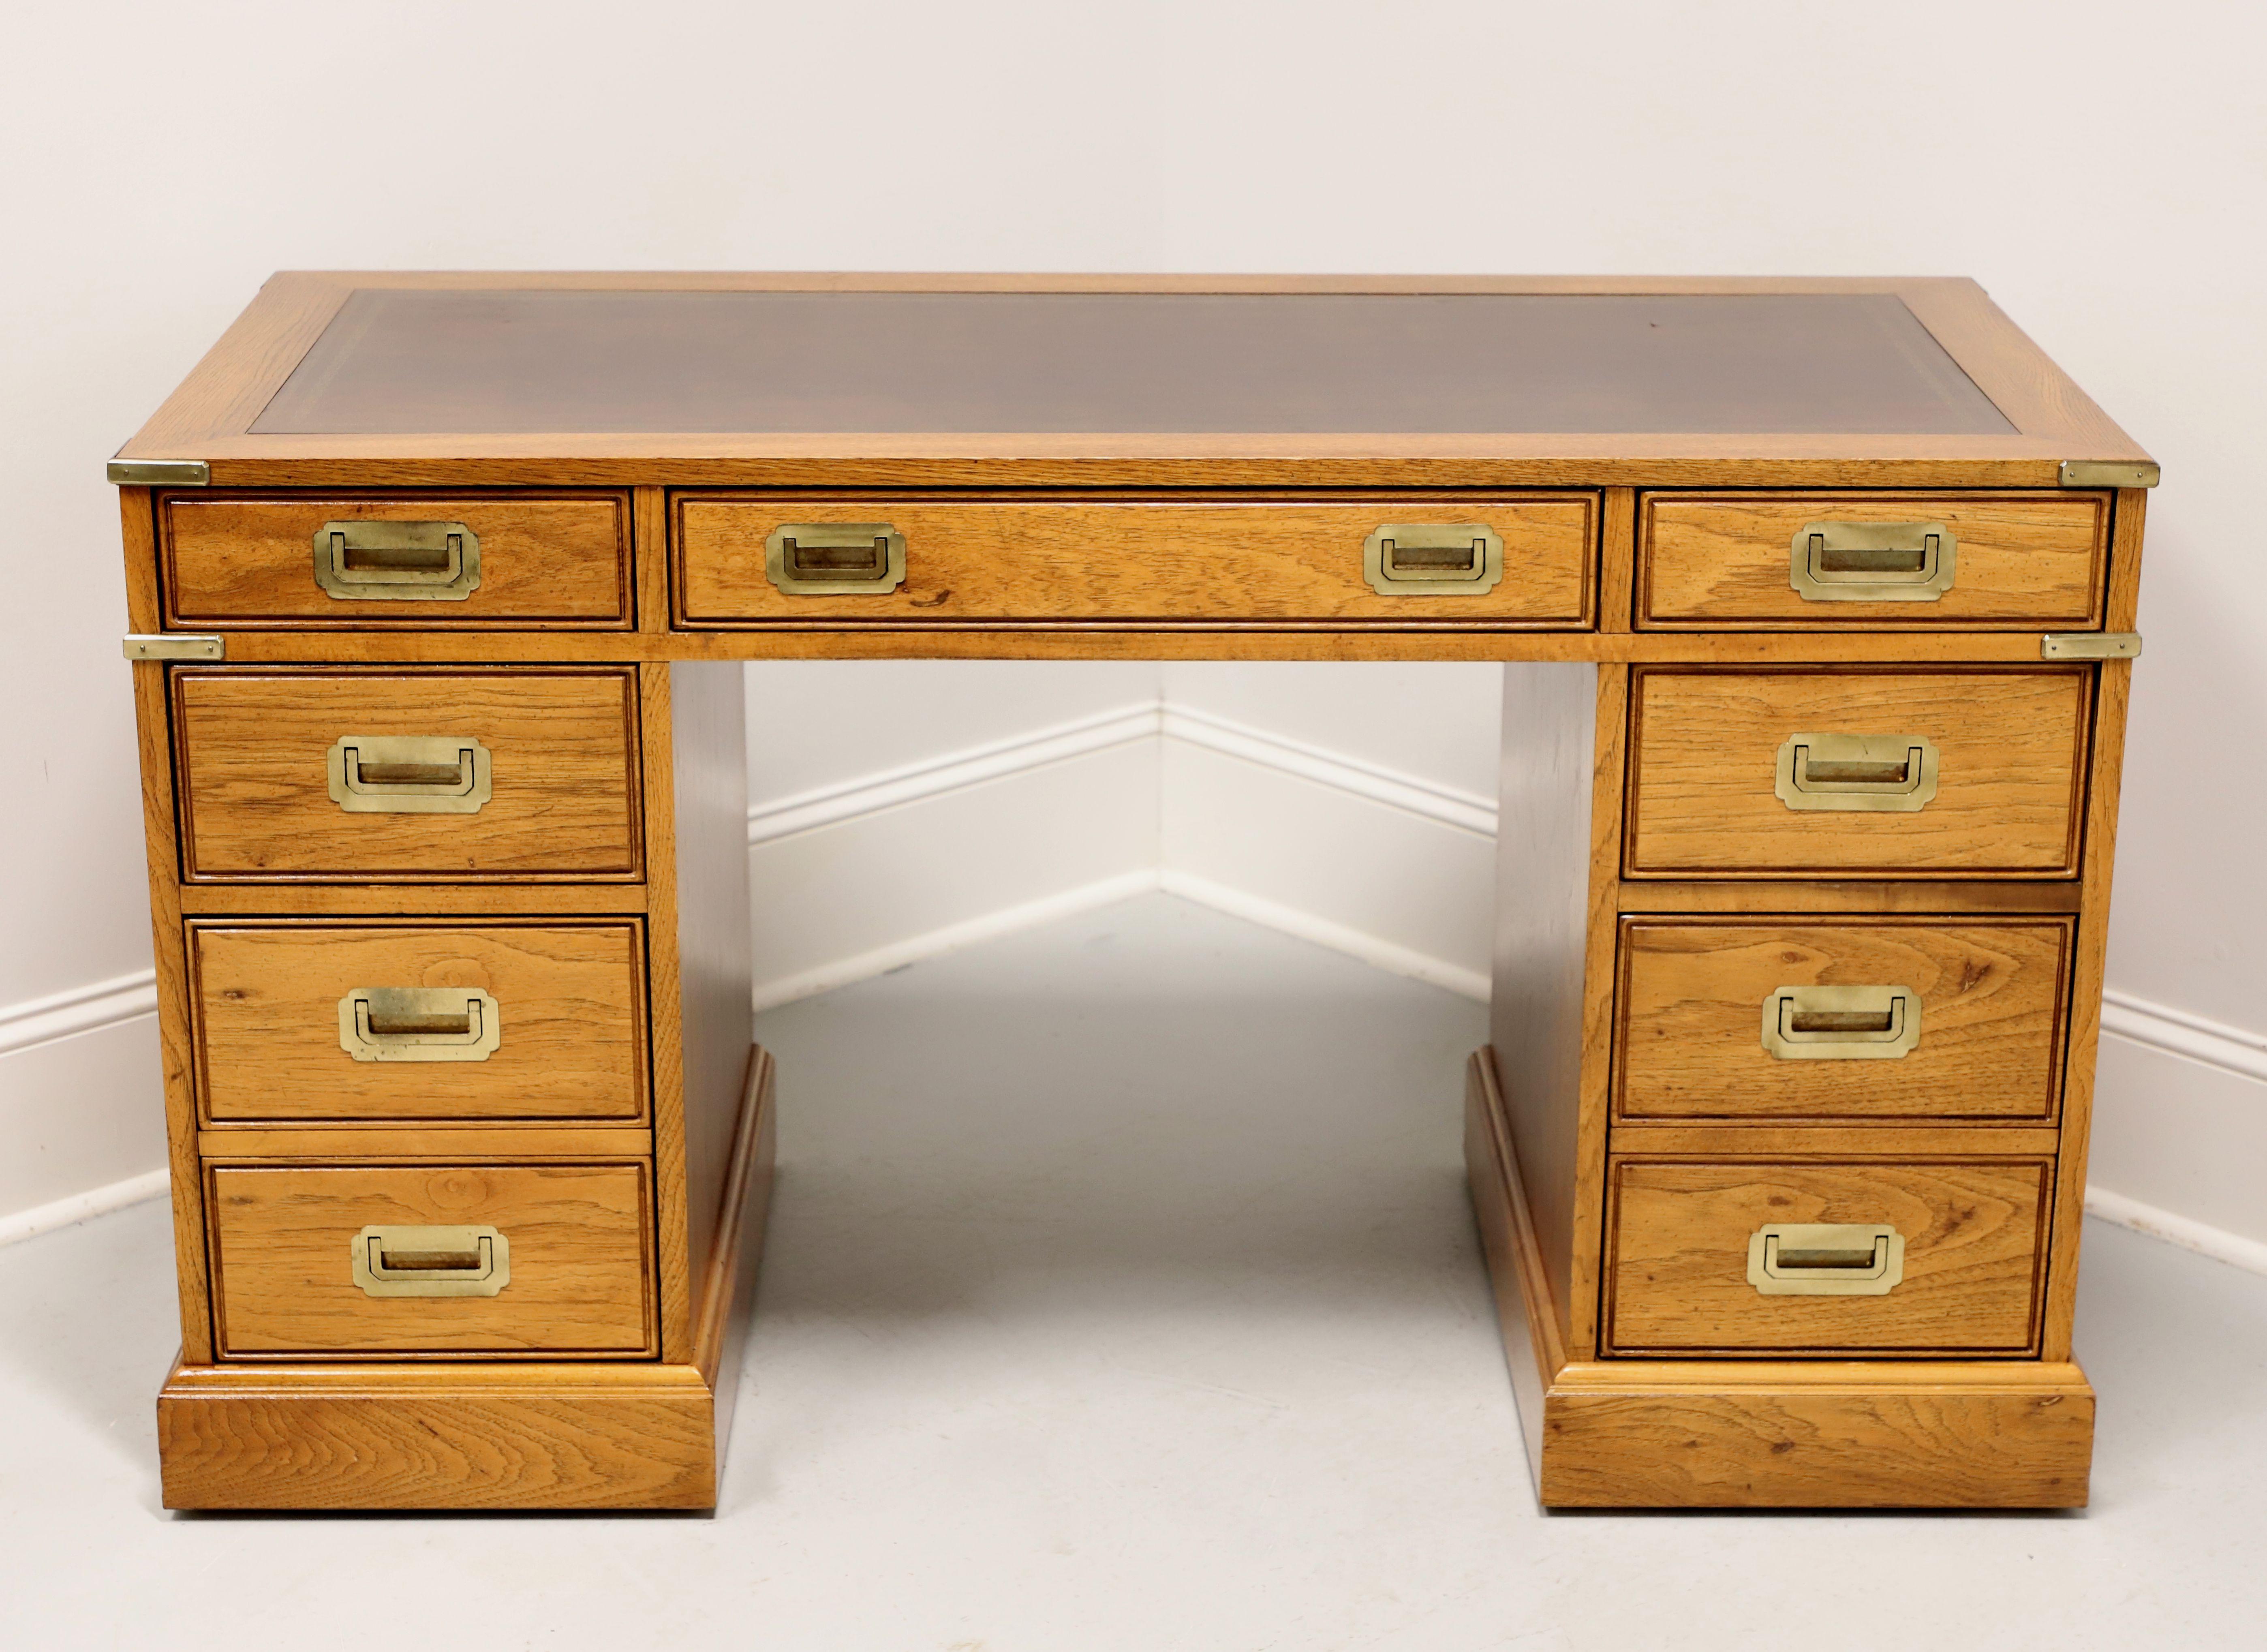 A Campaign style kneehole desk by National Mount Airy Furniture. Solid oak, embossed brown leather top, brass hardware & accents, and a solid base. The user side of the desk features seven drawers of dovetail construction, including a center drawer